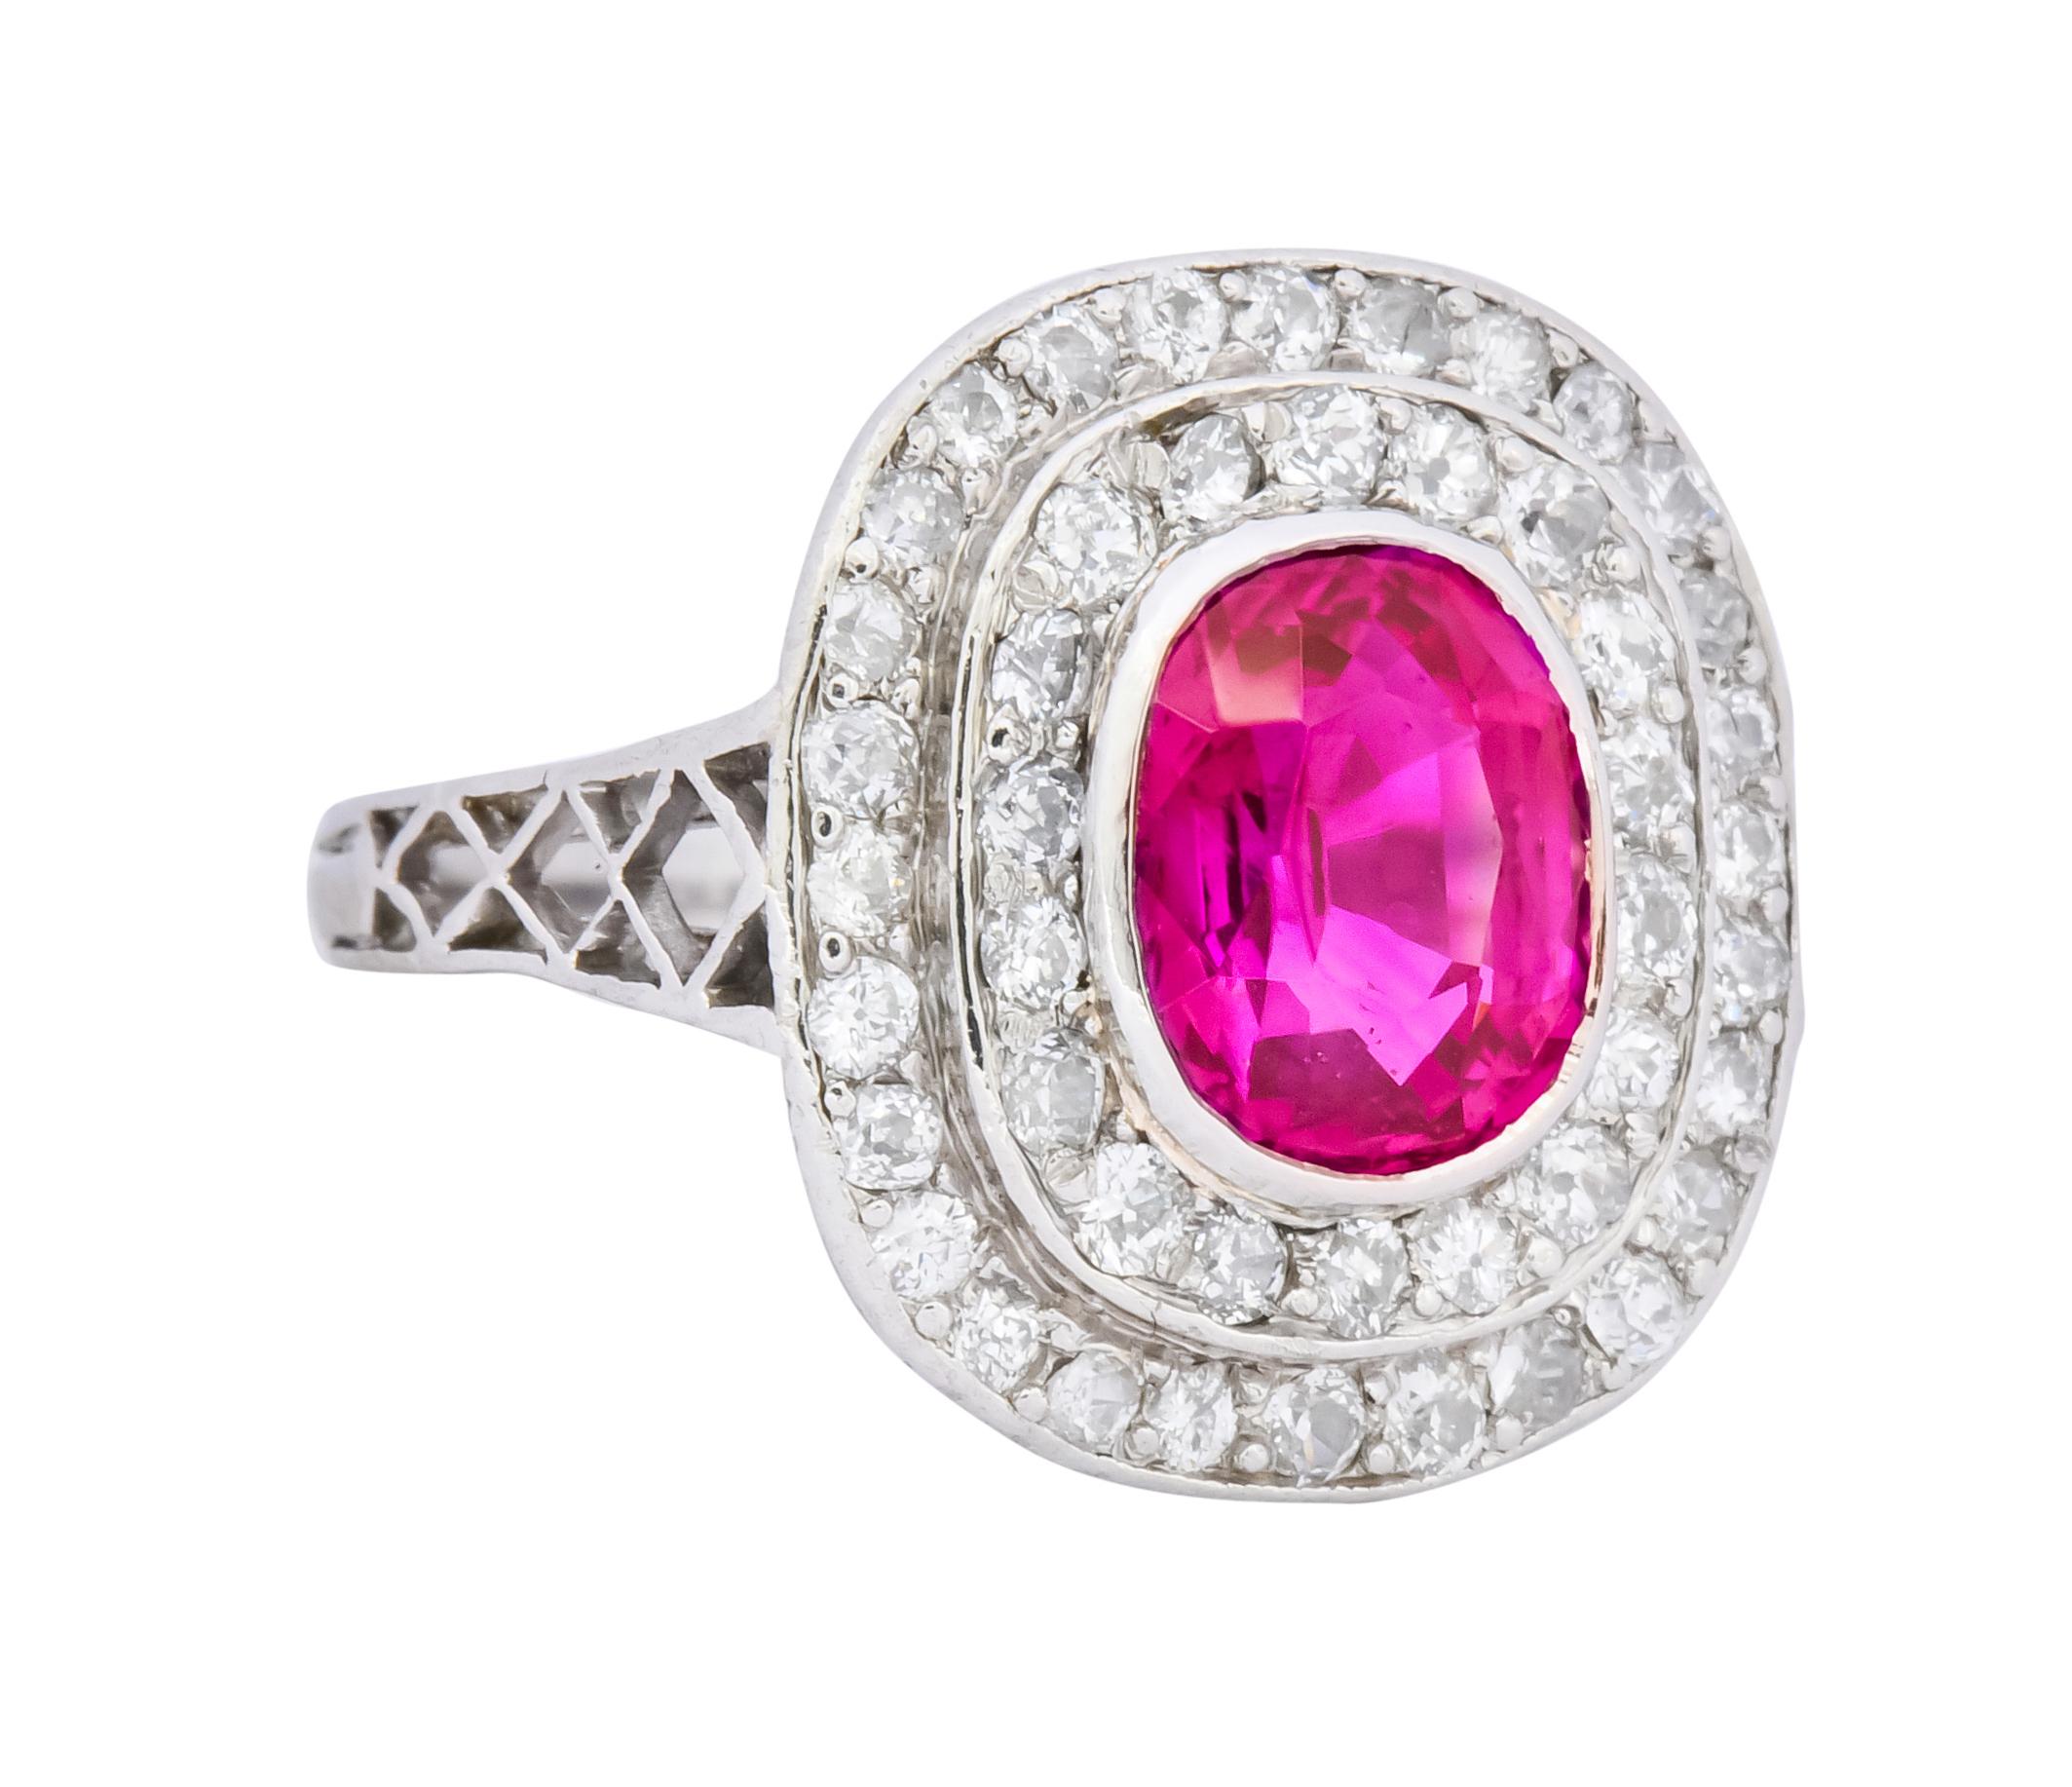 Centering a bezel set oval mixed cut Burmese ruby weighing 2.37 carats, transparent and raspberry red in color

Surrounded by a double halo of round brilliant cut diamonds weighing approximately 1.00 carat total, G to I color and SI clarity

With a